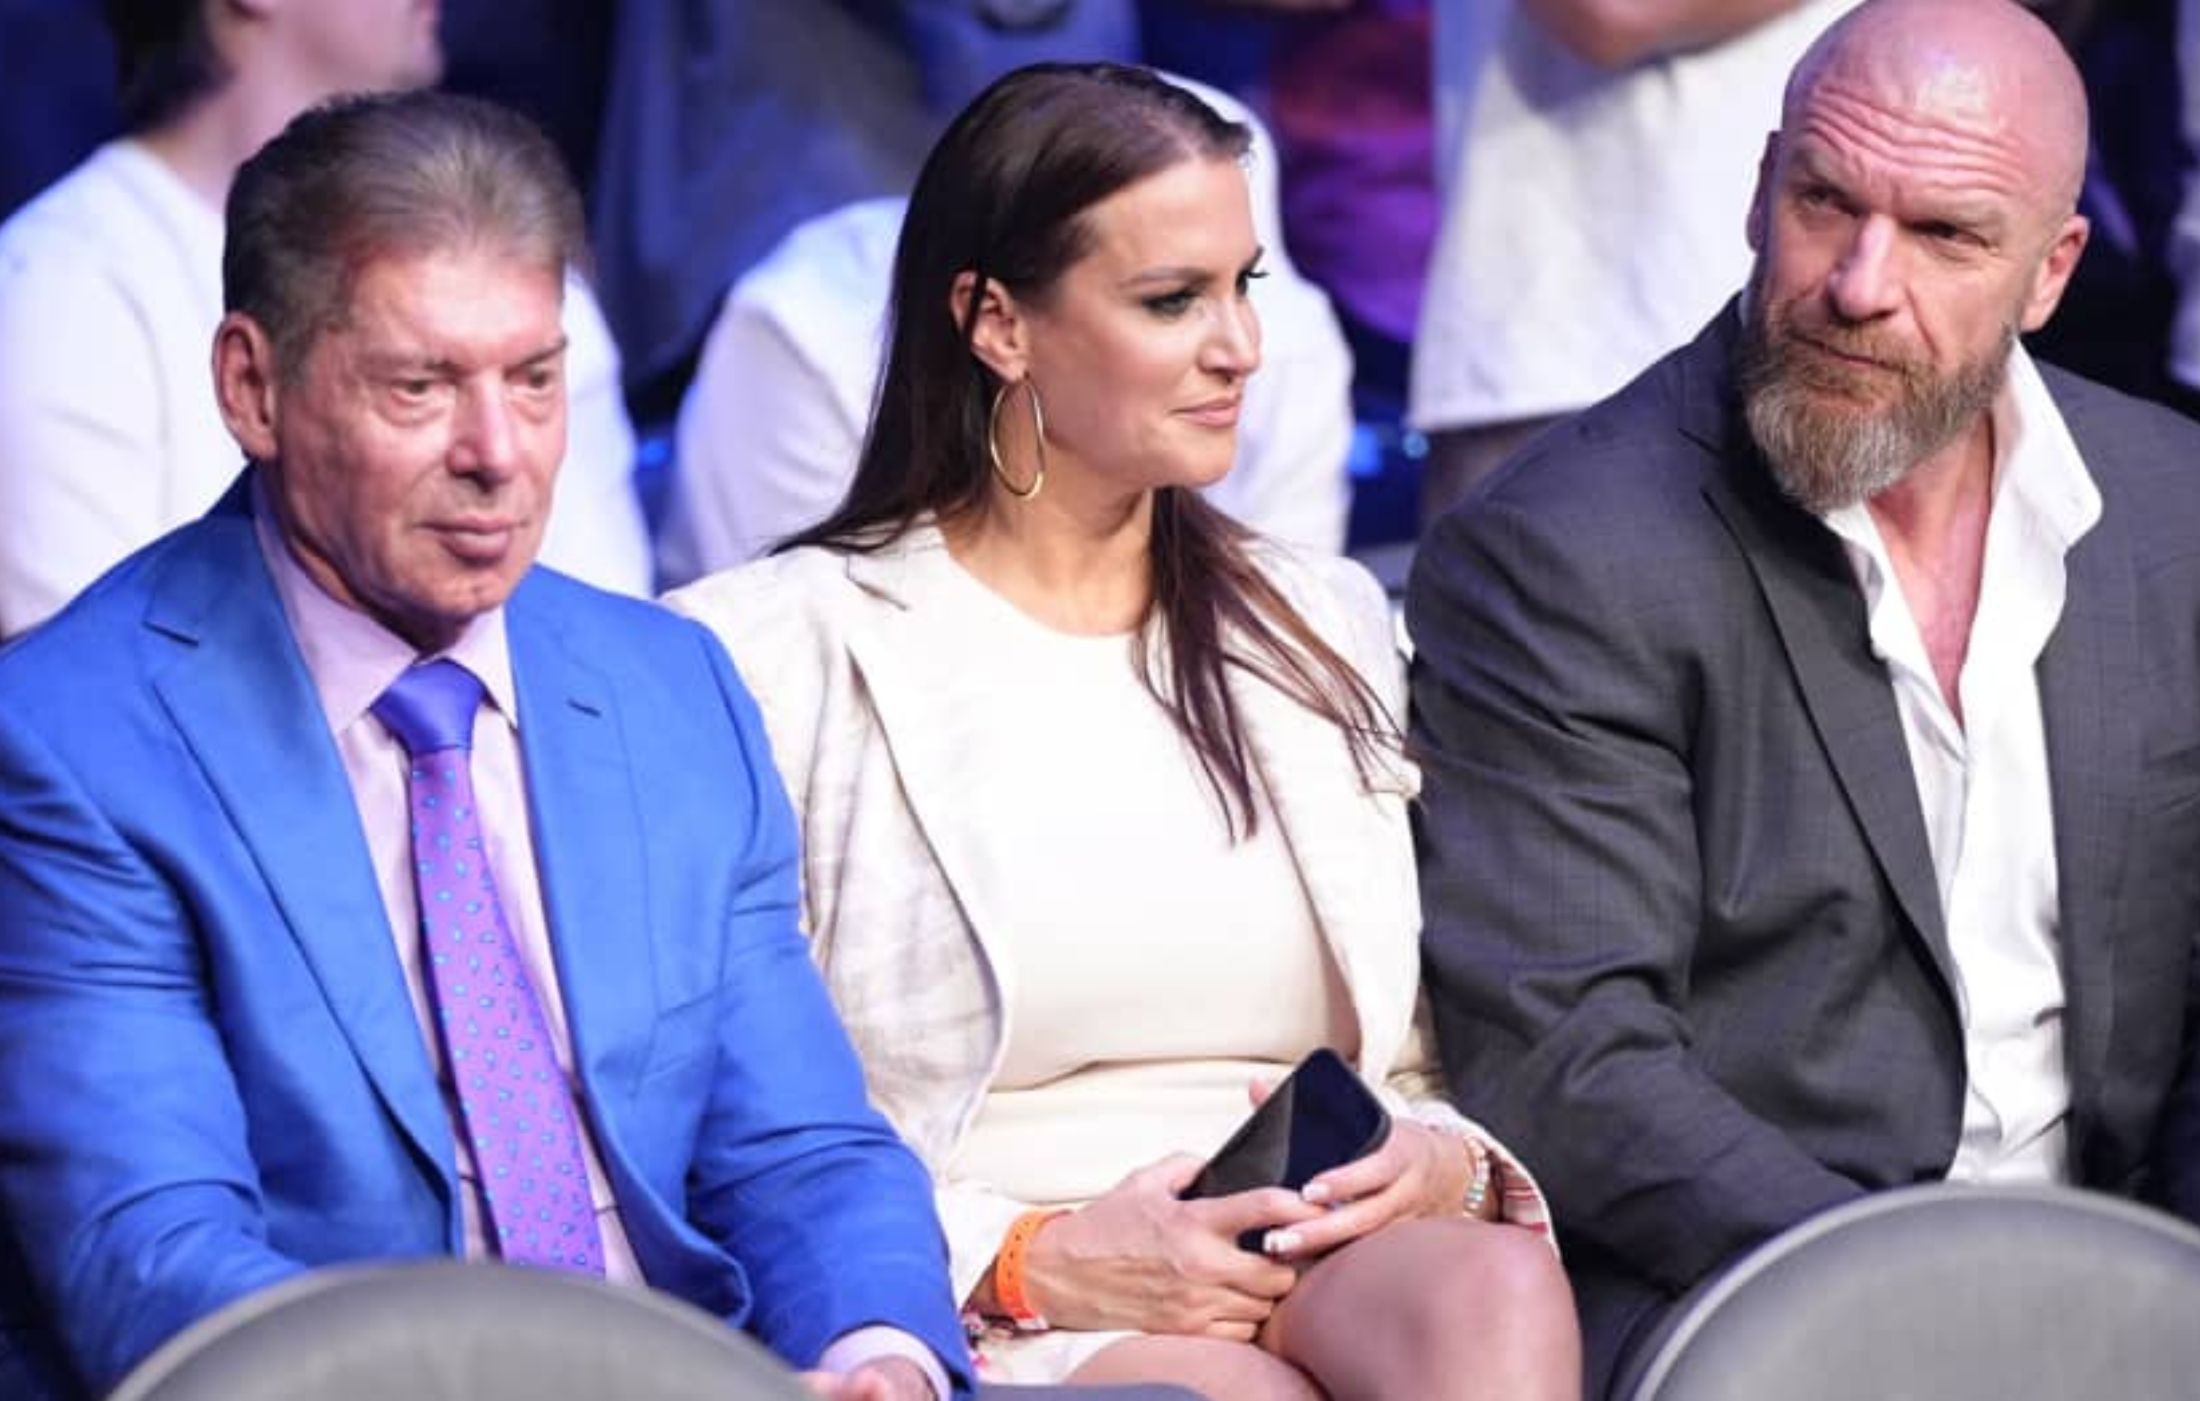 Triple H had issues working with Vince McMahon